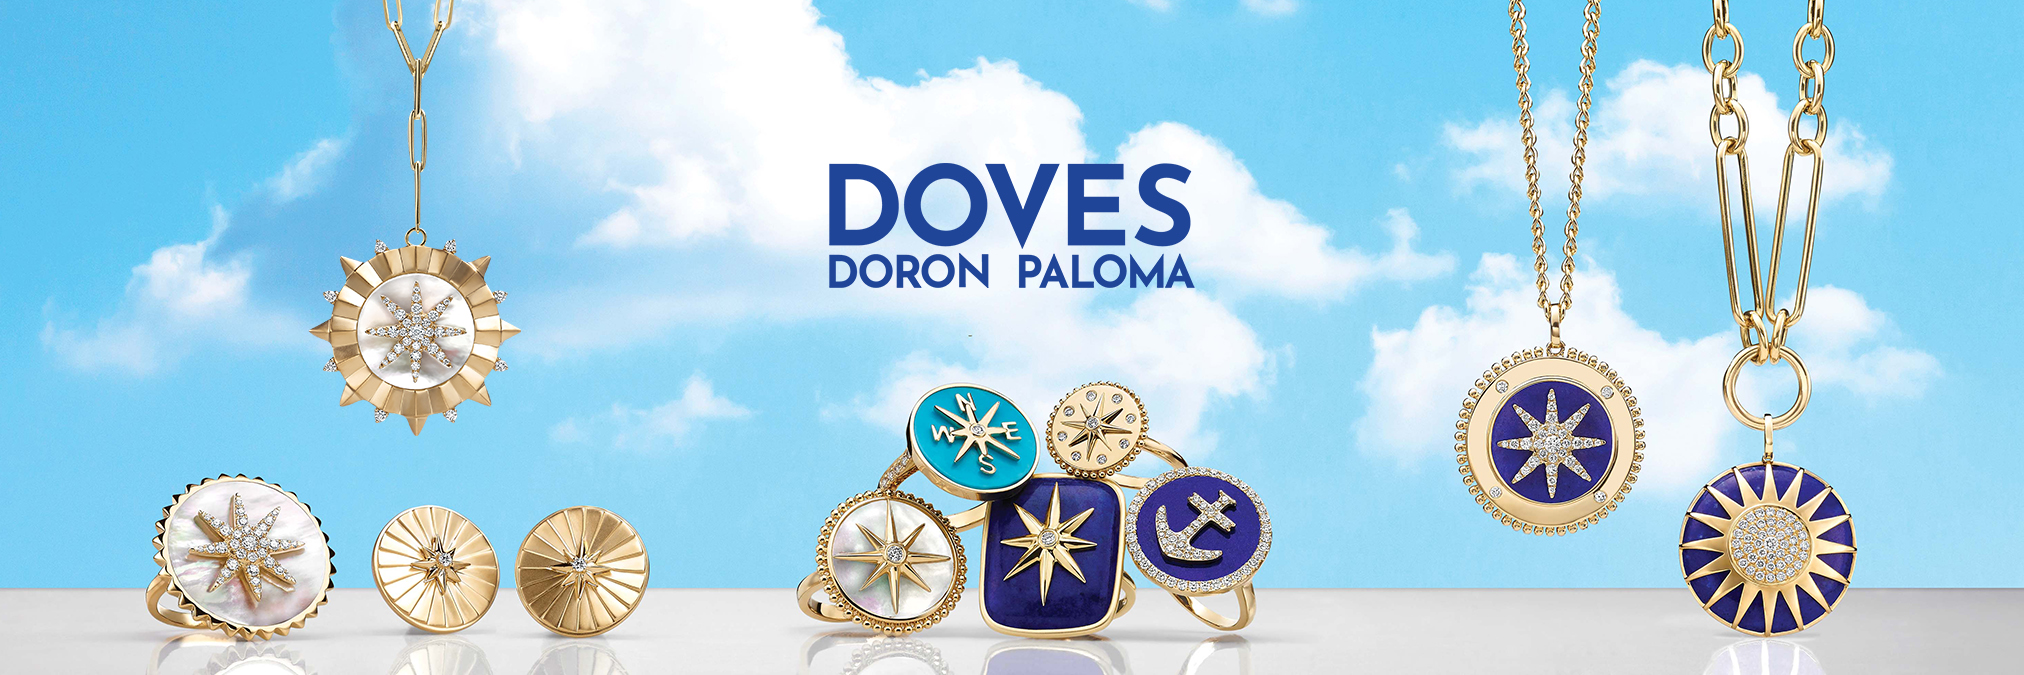 Kettermans Jewelers Doves by Doron Paloma